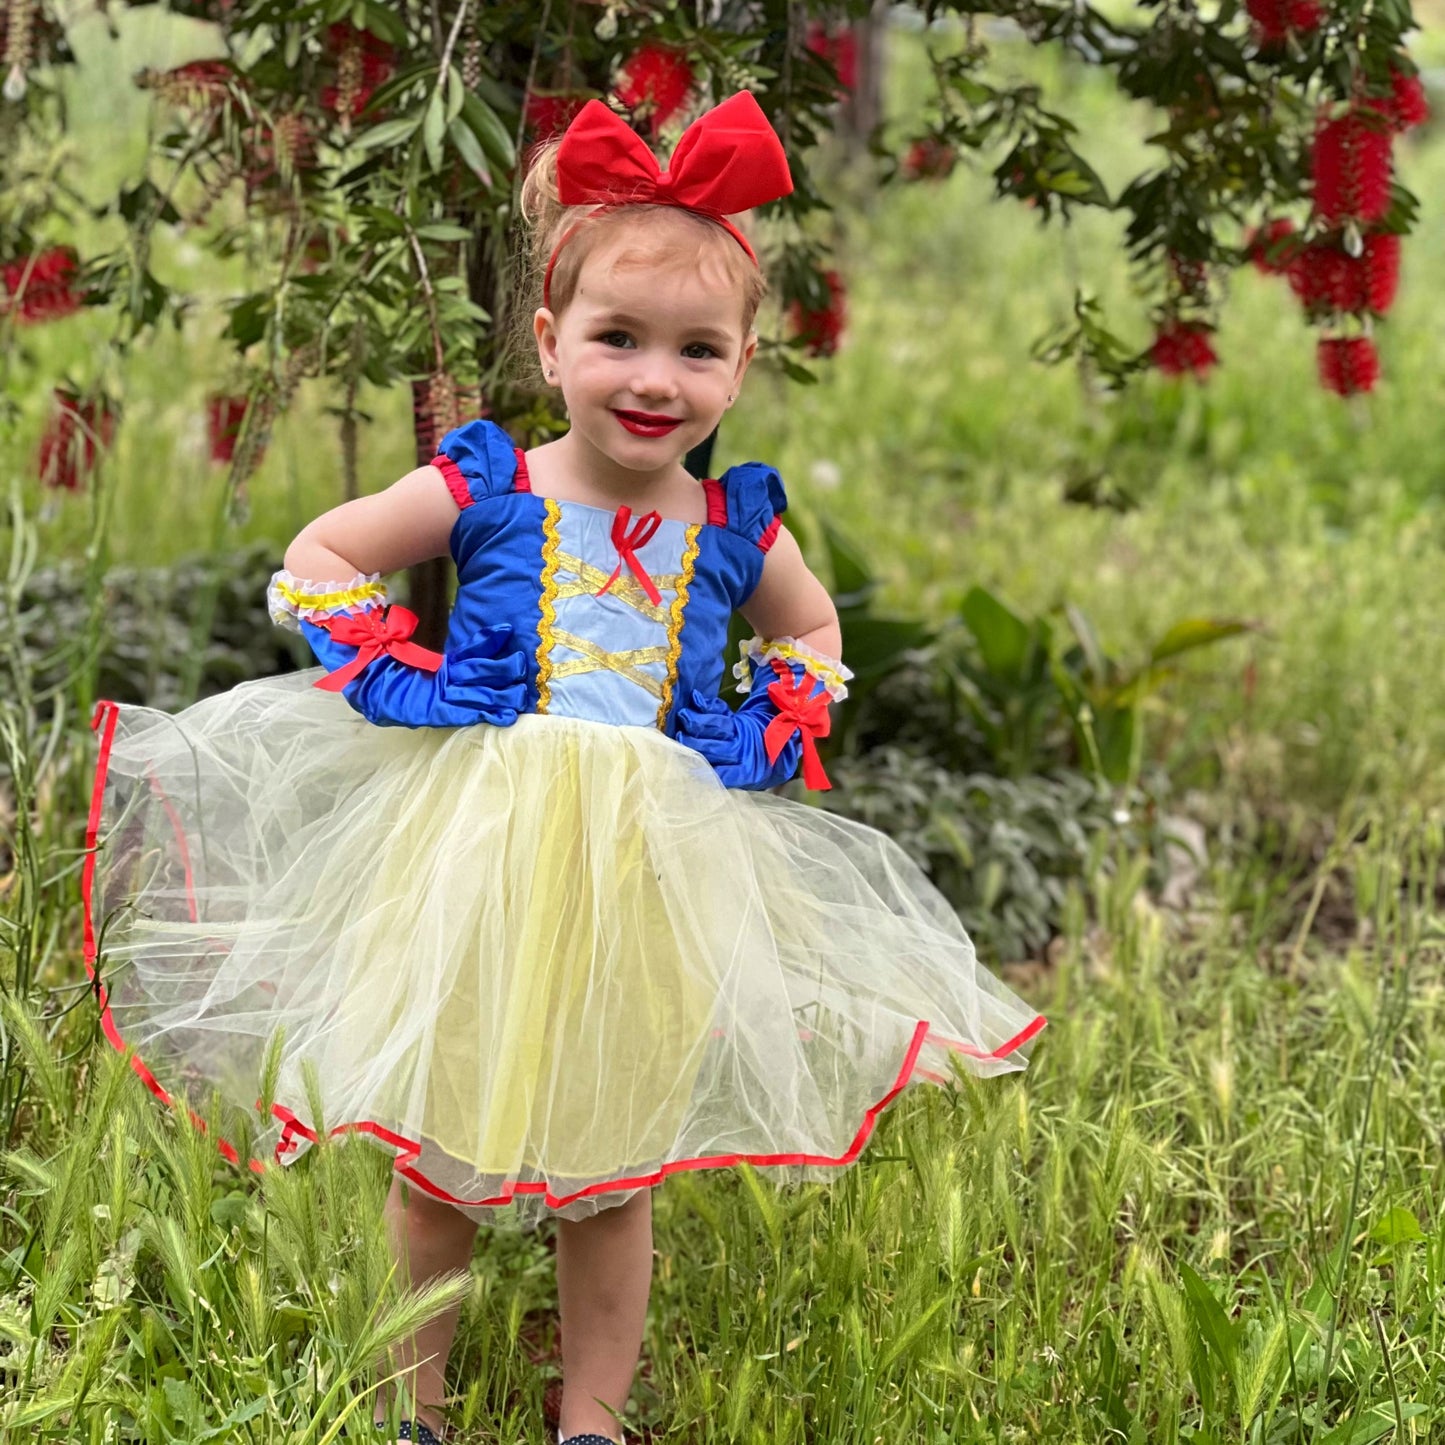 Snow White Dress Up Costume for Girls - Foierp